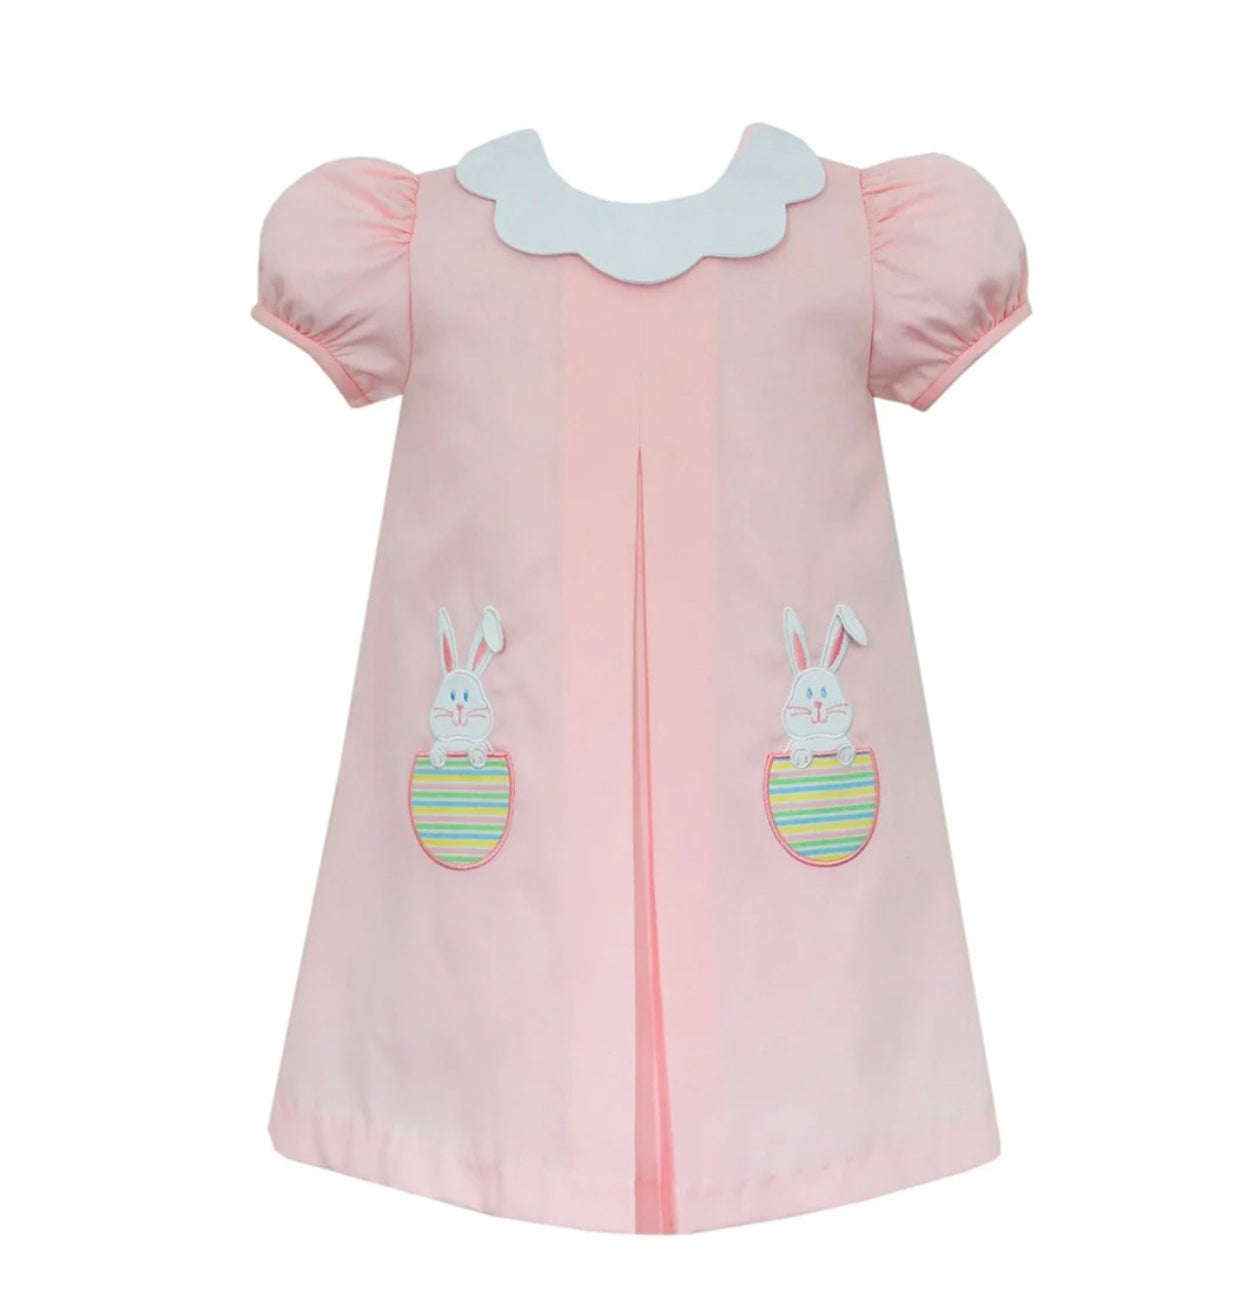 Claire and Charlie Easter Egg Dress